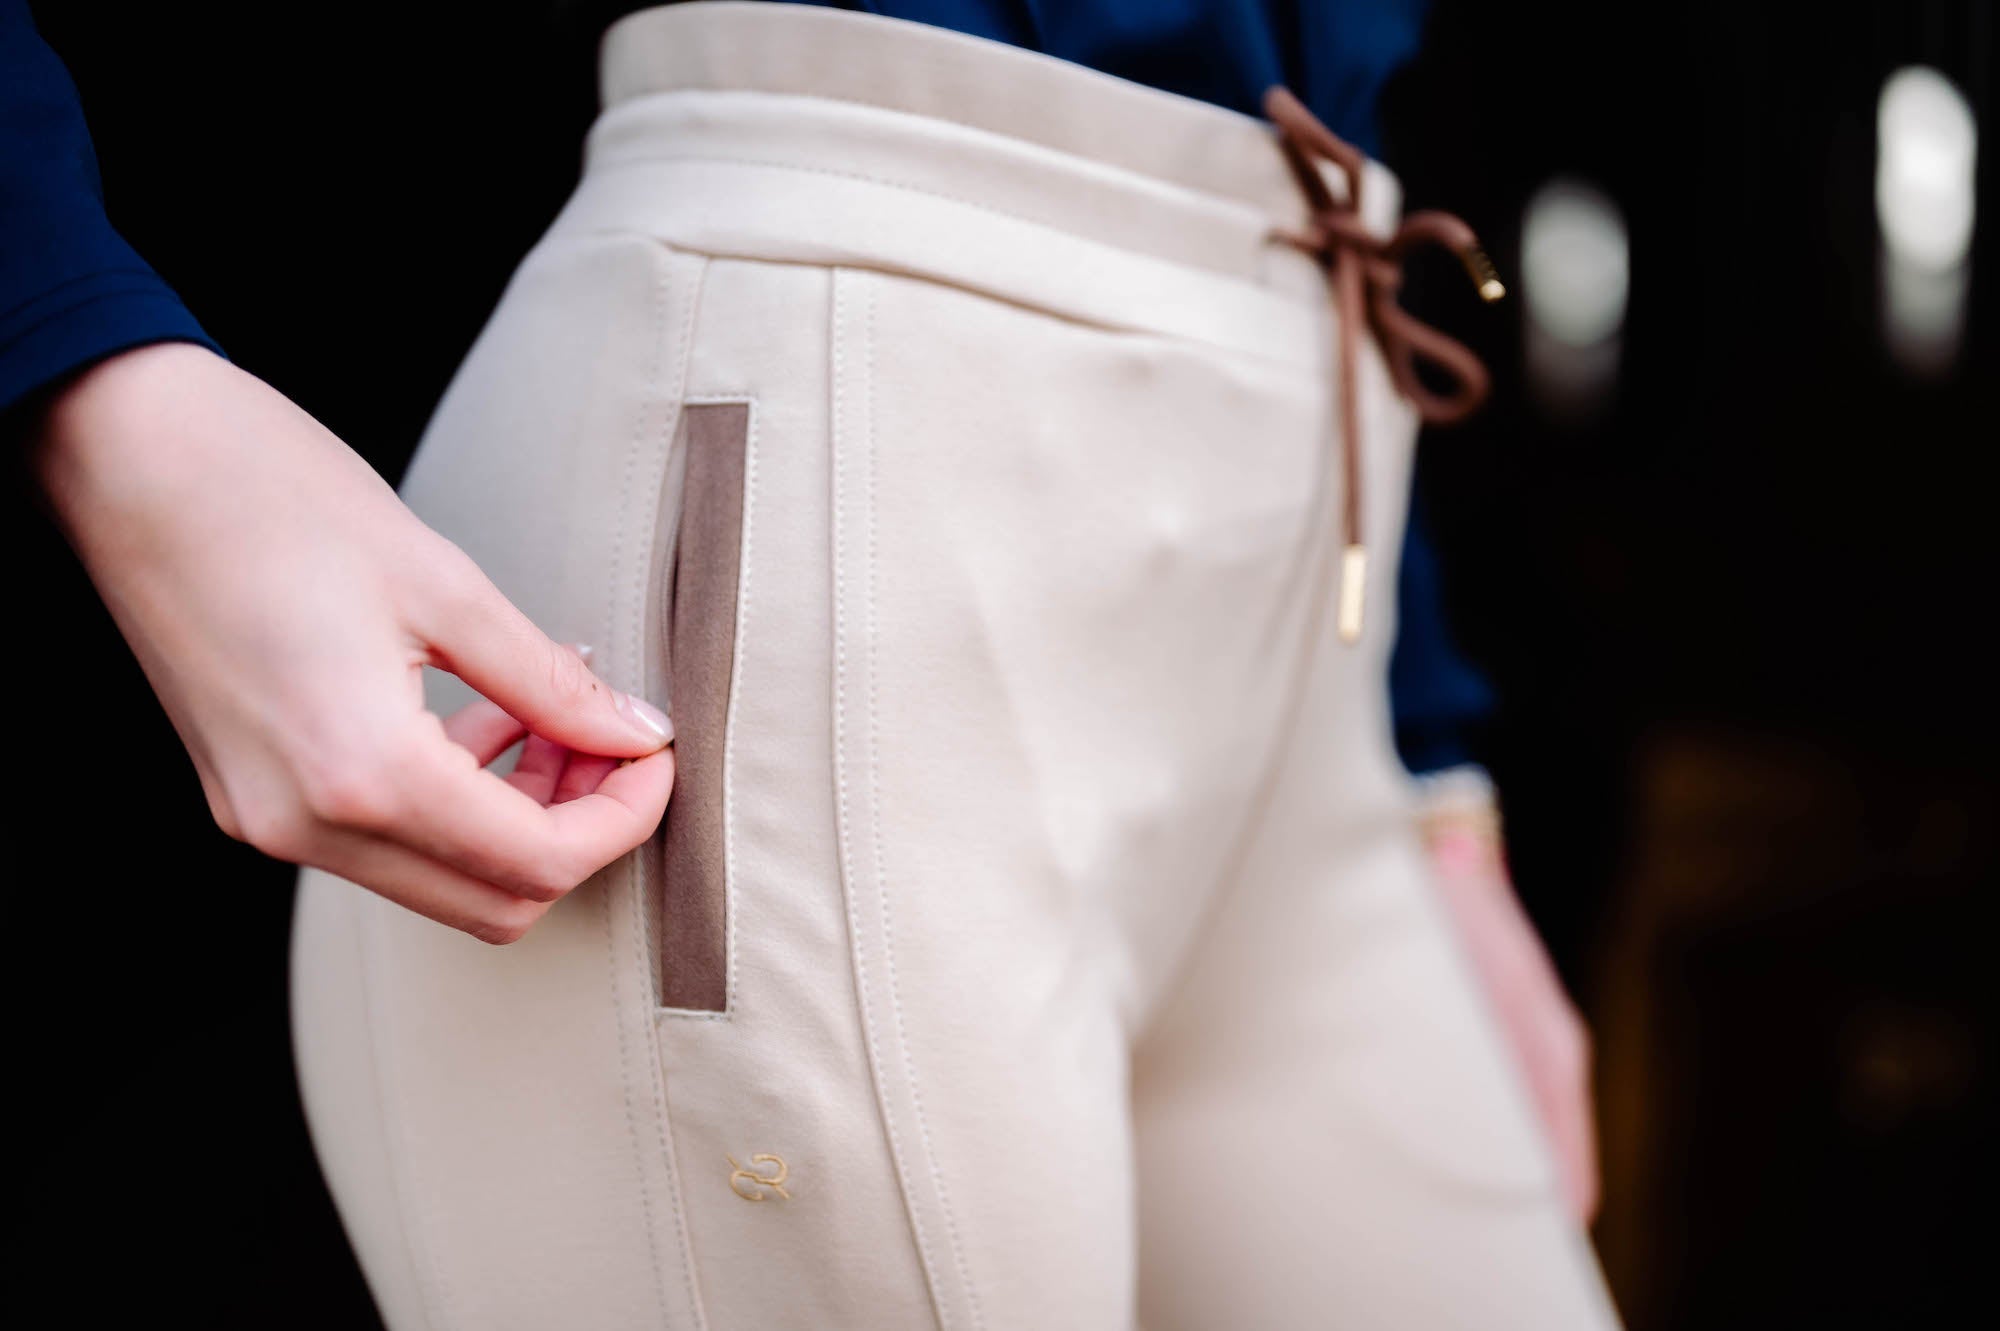 Jogger Knee Patch Breech - Tan - Equiluxe Tack